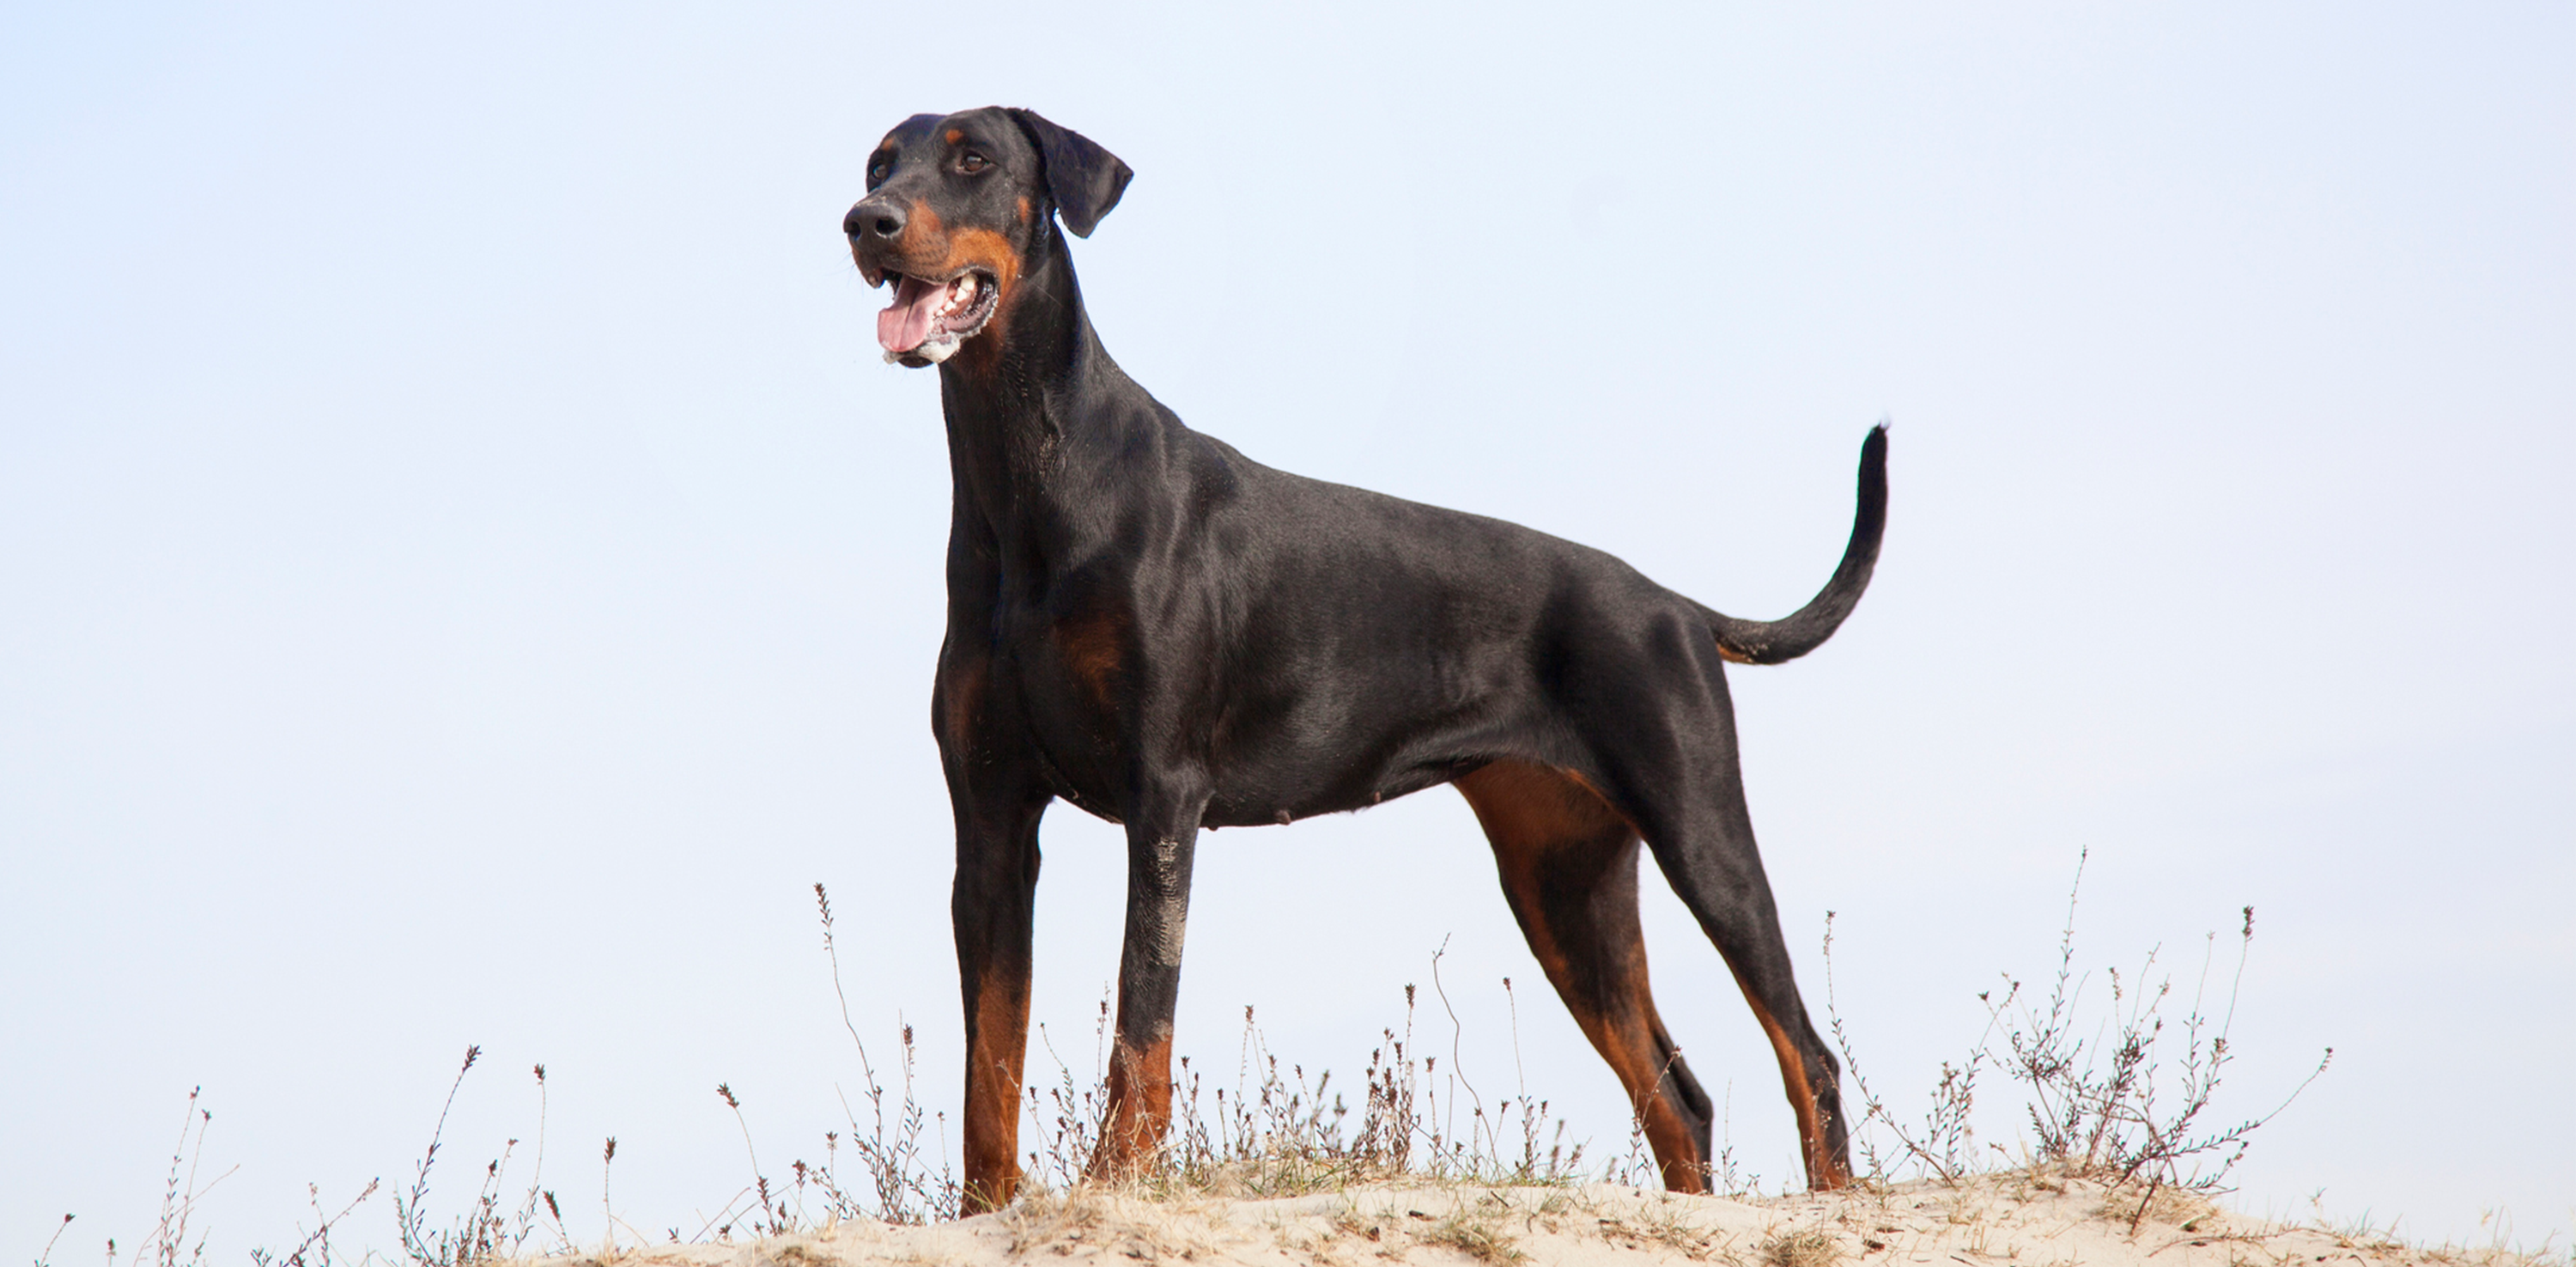 do dobermans need a lot of attention